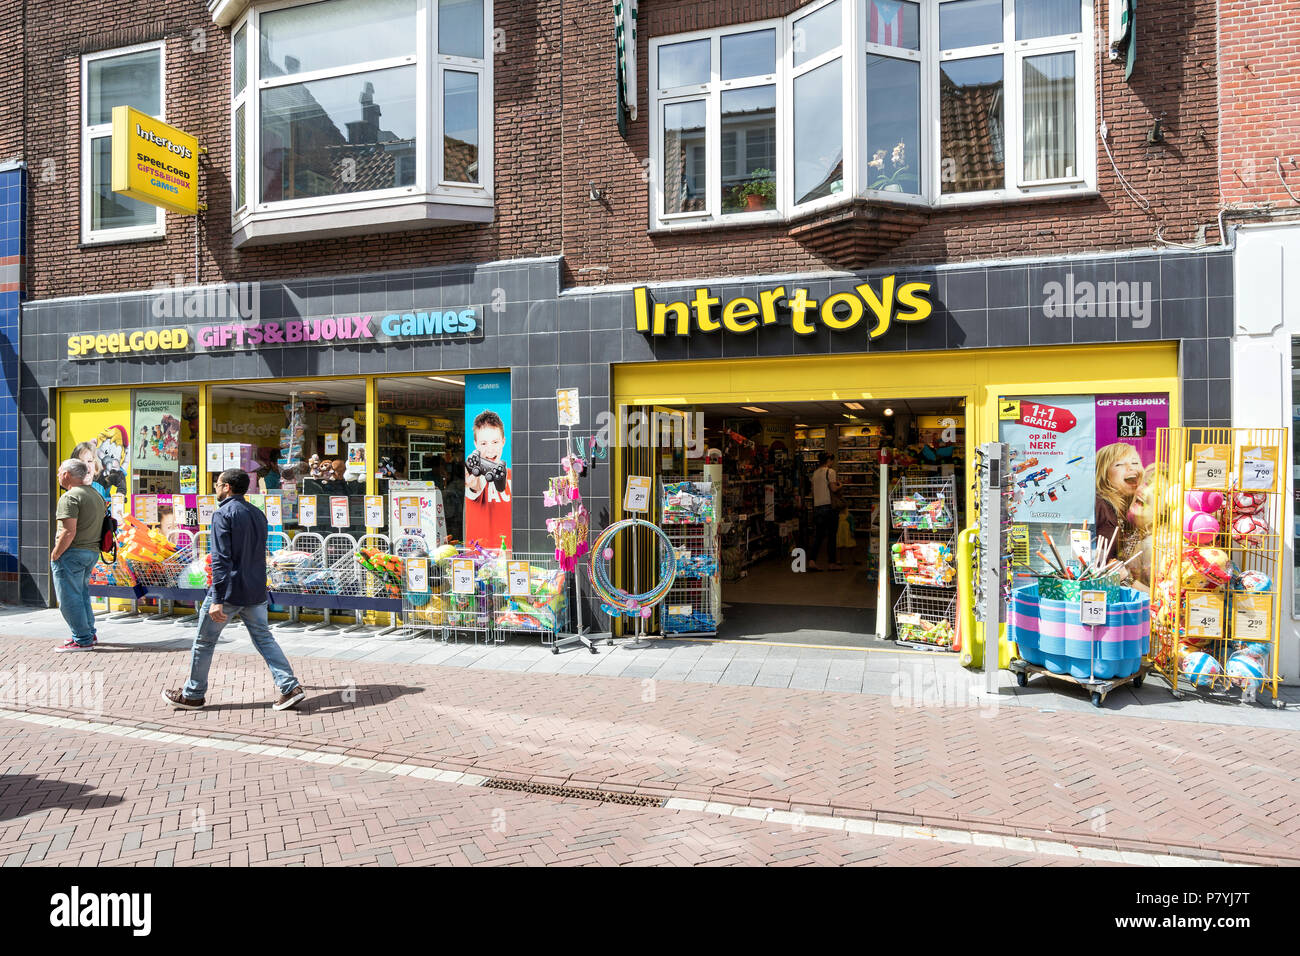 Netherlands Toys High Resolution Stock Photography and Images - Alamy